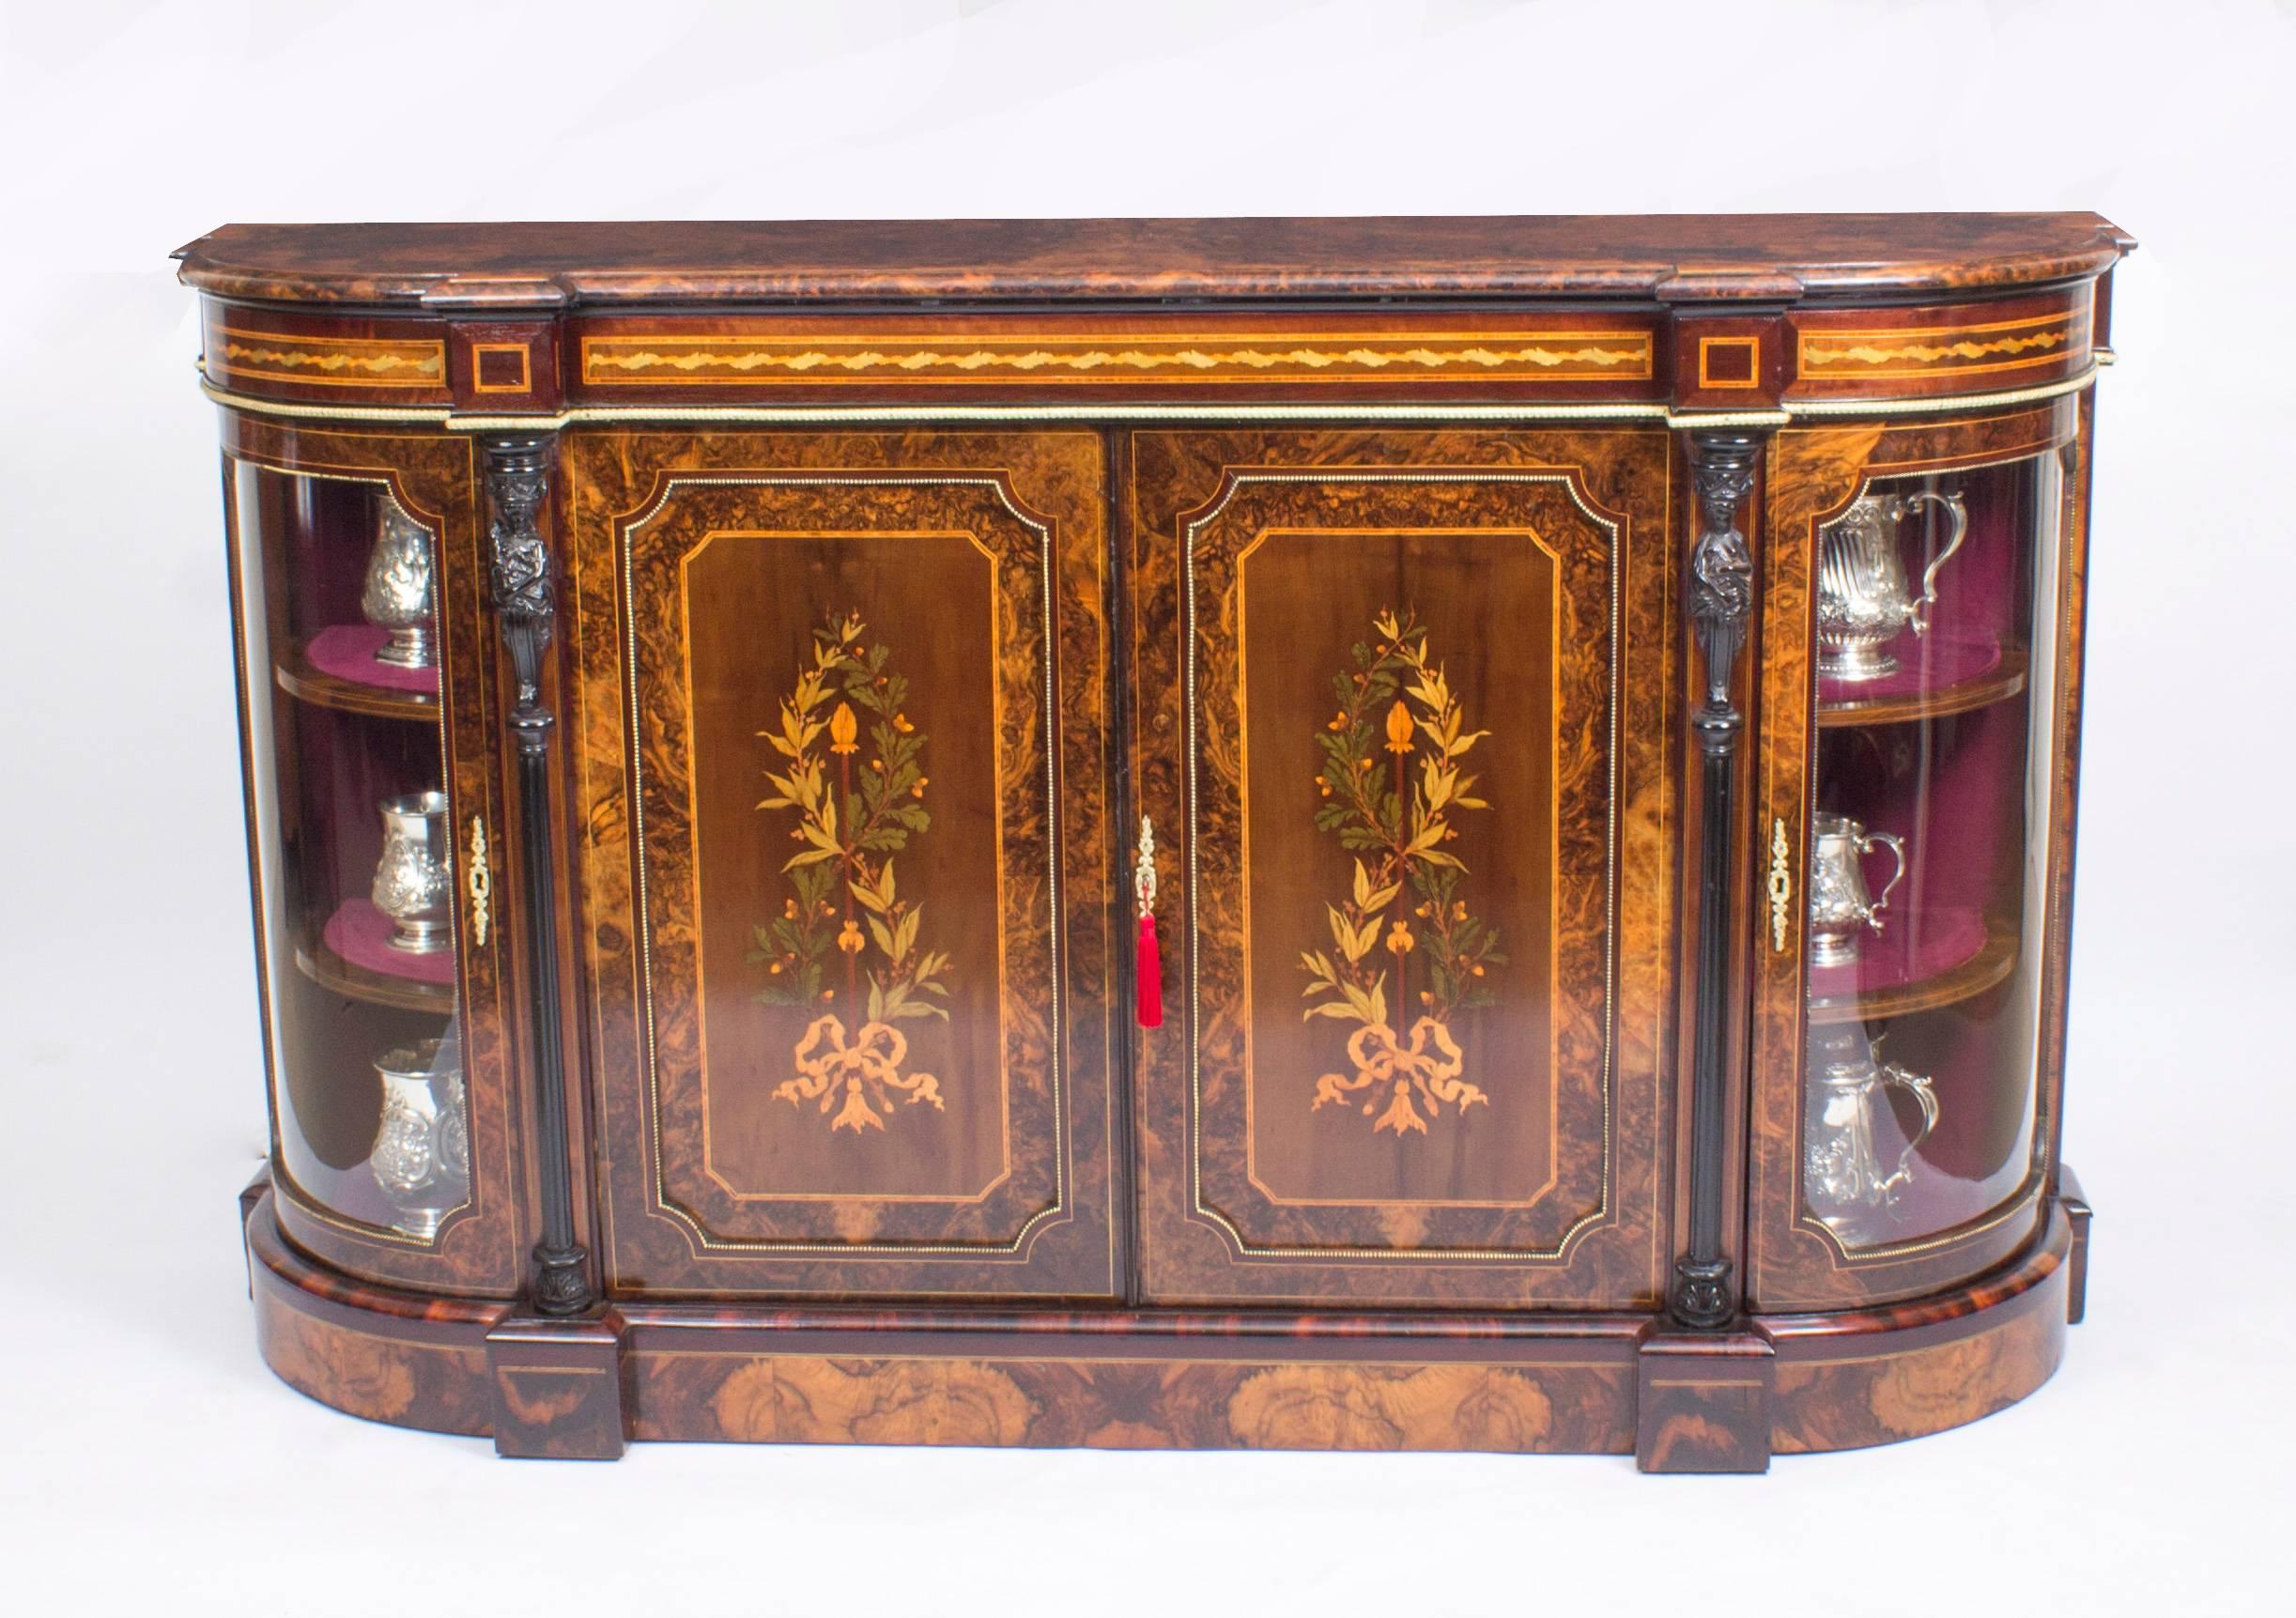 This is a stunning antique Victorian burr walnut and marquetry inlaid credenza, circa 1860 in date.

The entire piece highlights the unique and truly exceptional pattern of the book matched burr walnut veneers, and it has been enriched by the